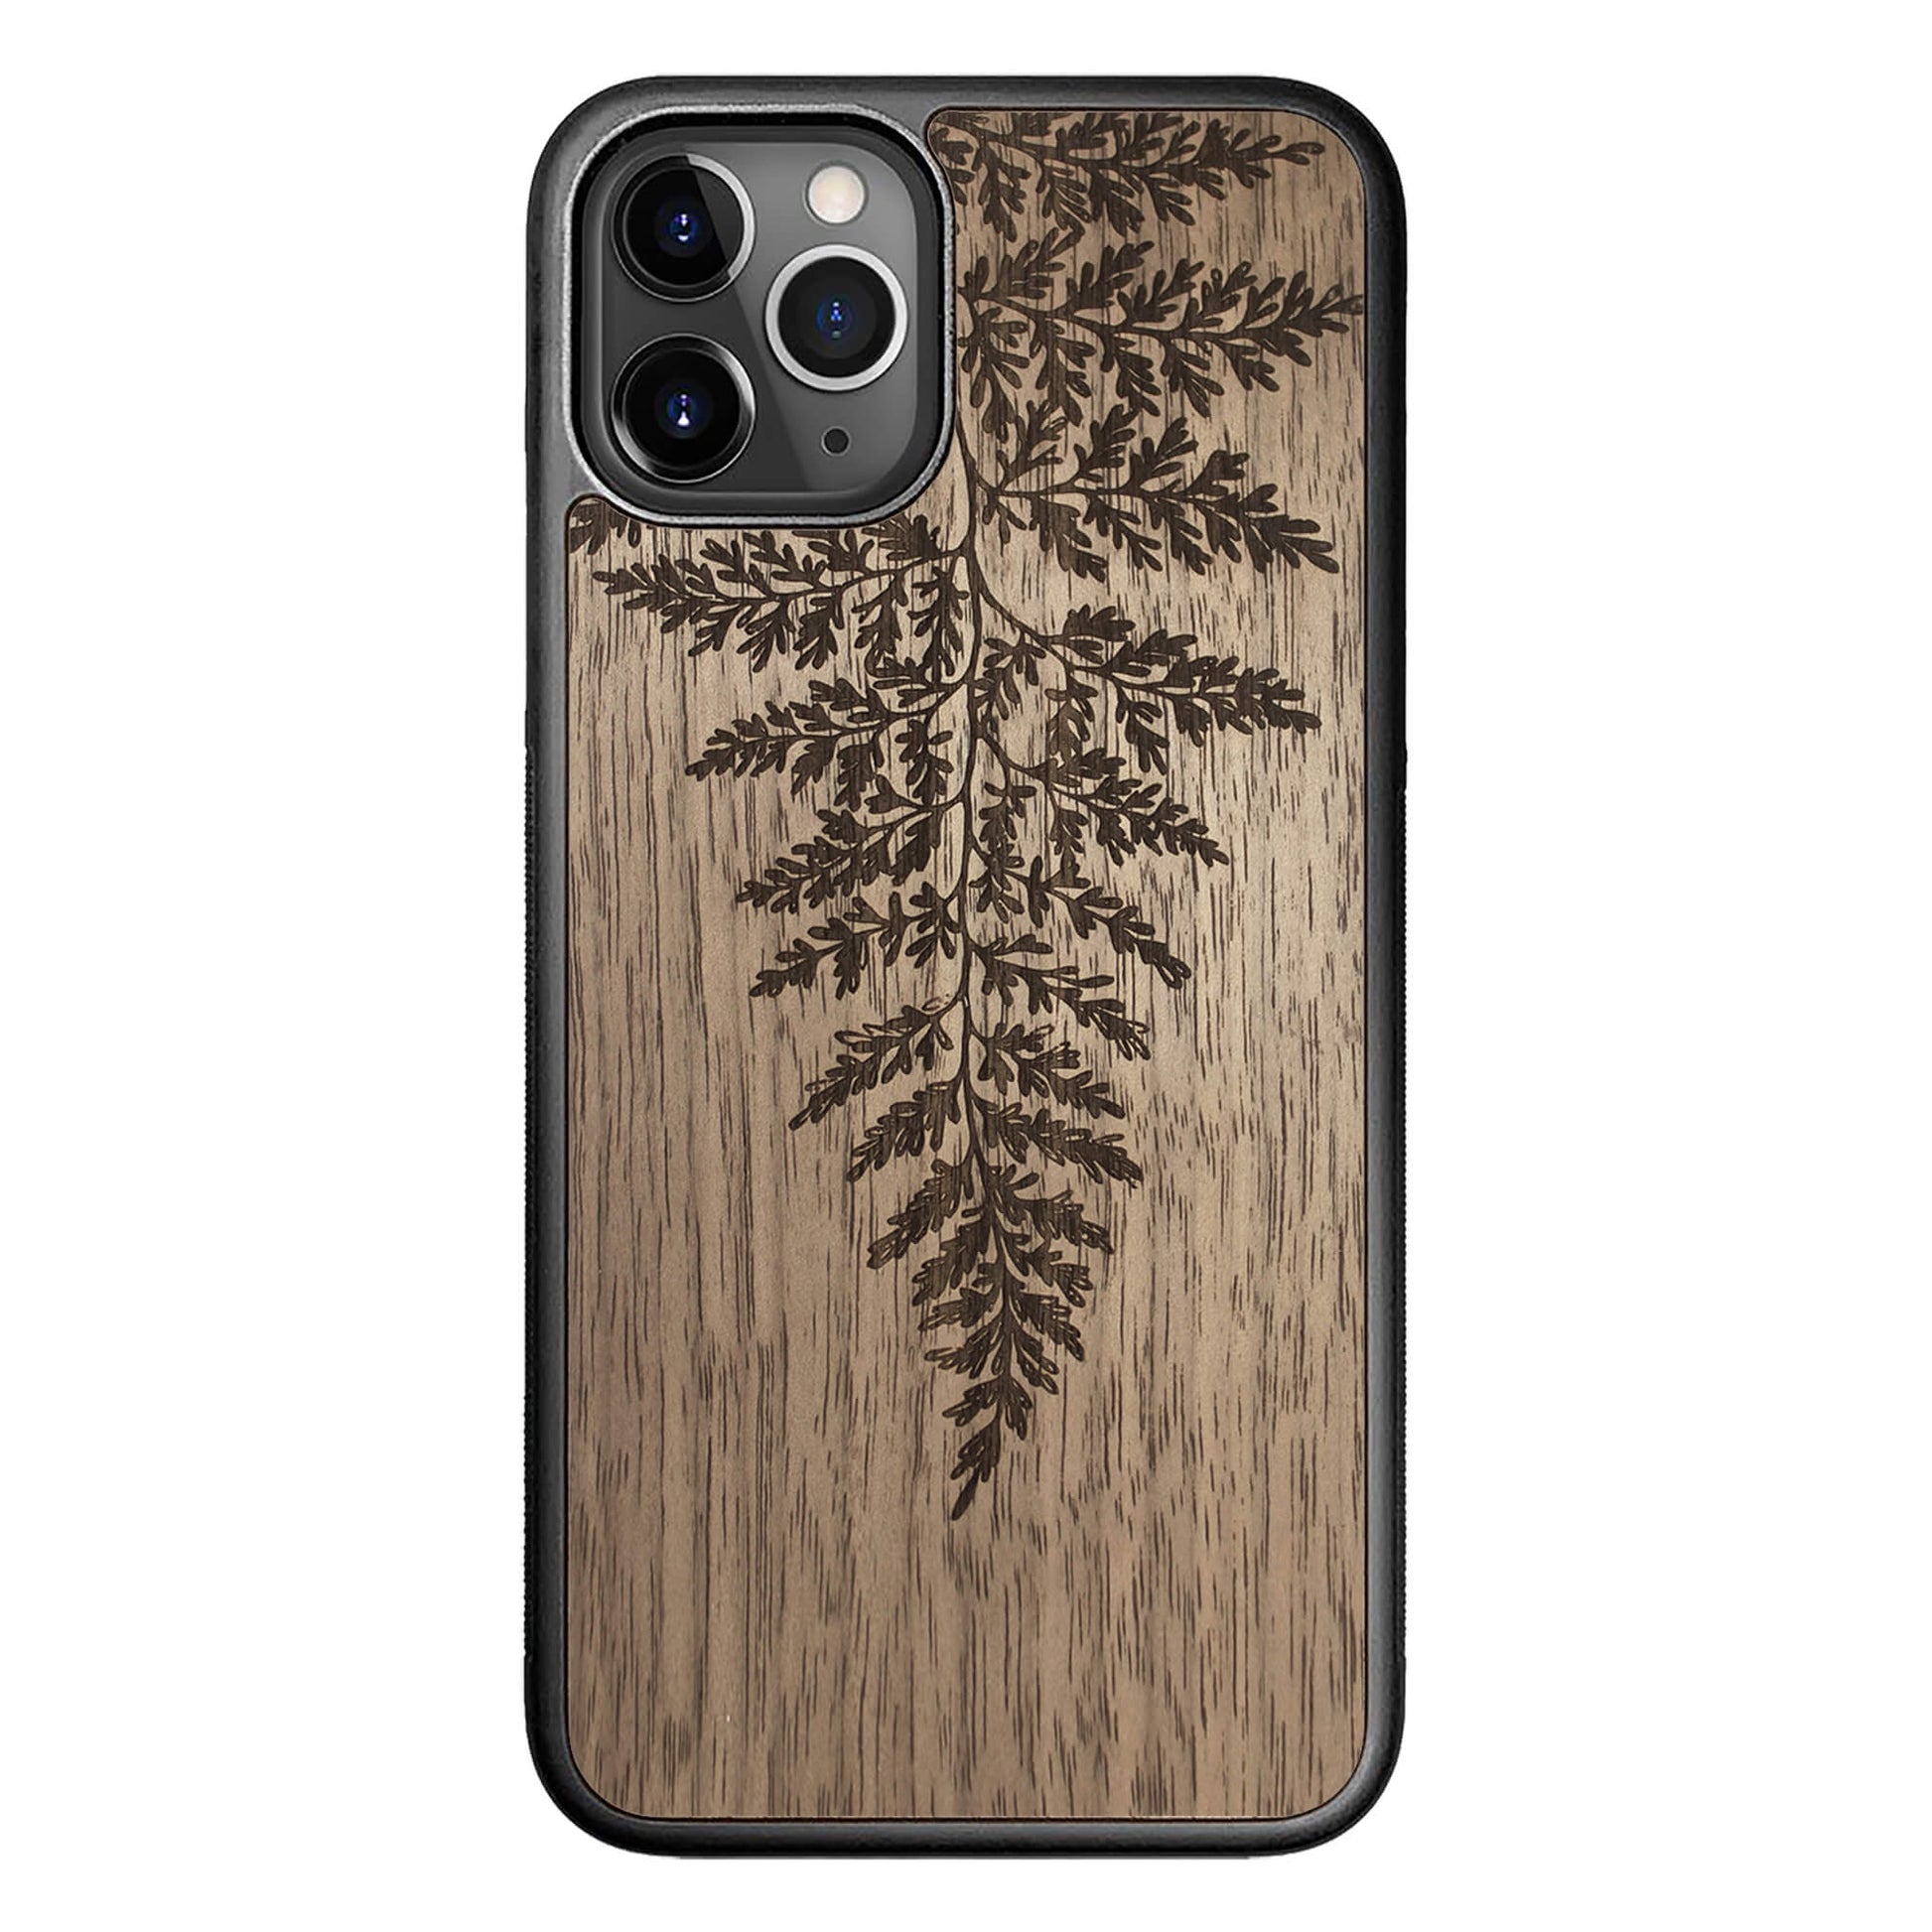 Wooden Case for iPhone 11 Pro Fern